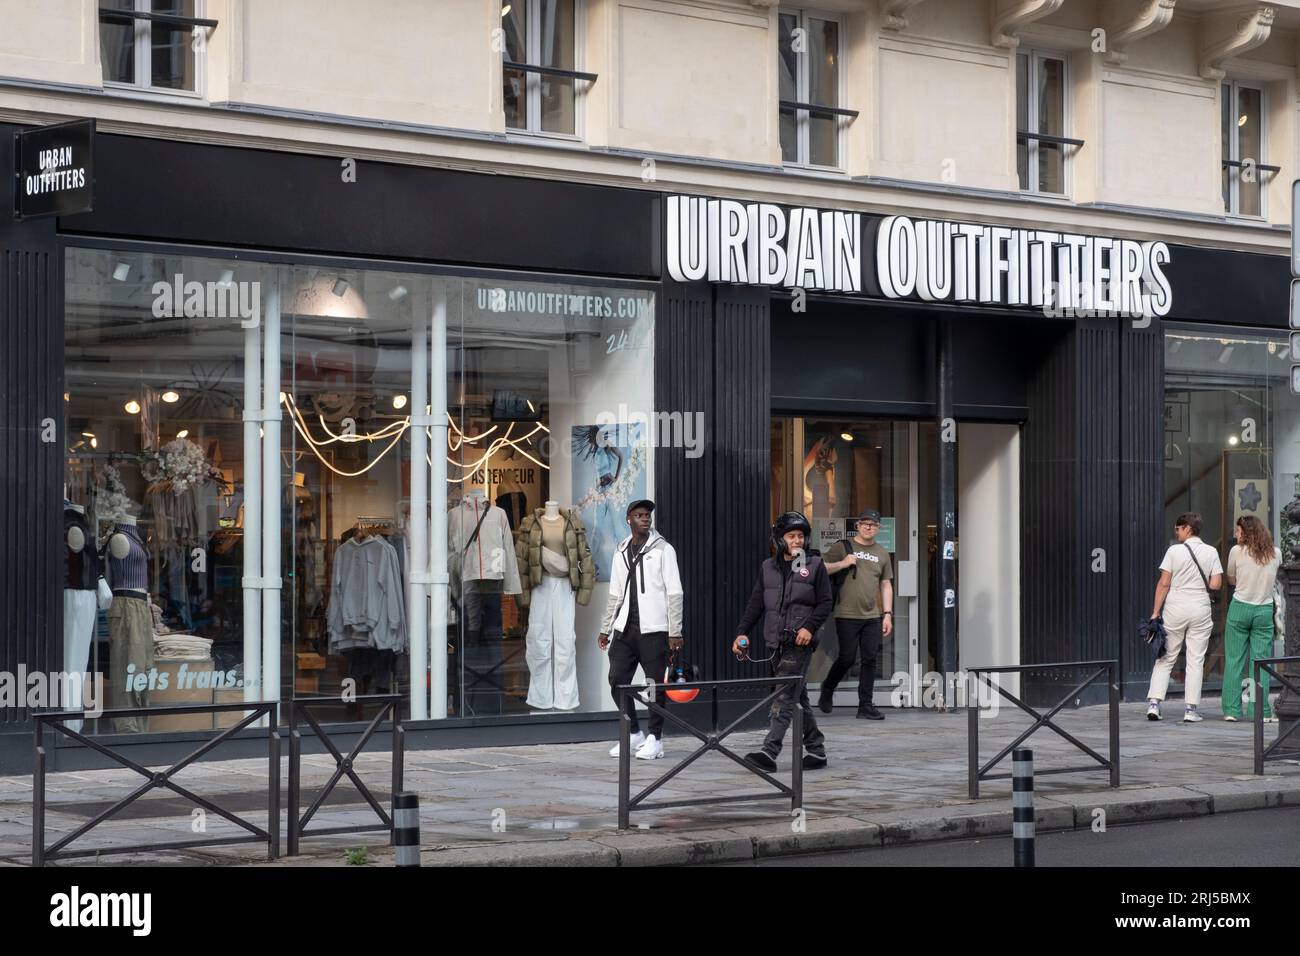 Urban Outfitters shop on Rue de Rivoli in Paris. Urban Outfitters, Inc. (URBN) is a multinational lifestyle retail company Stock Photo